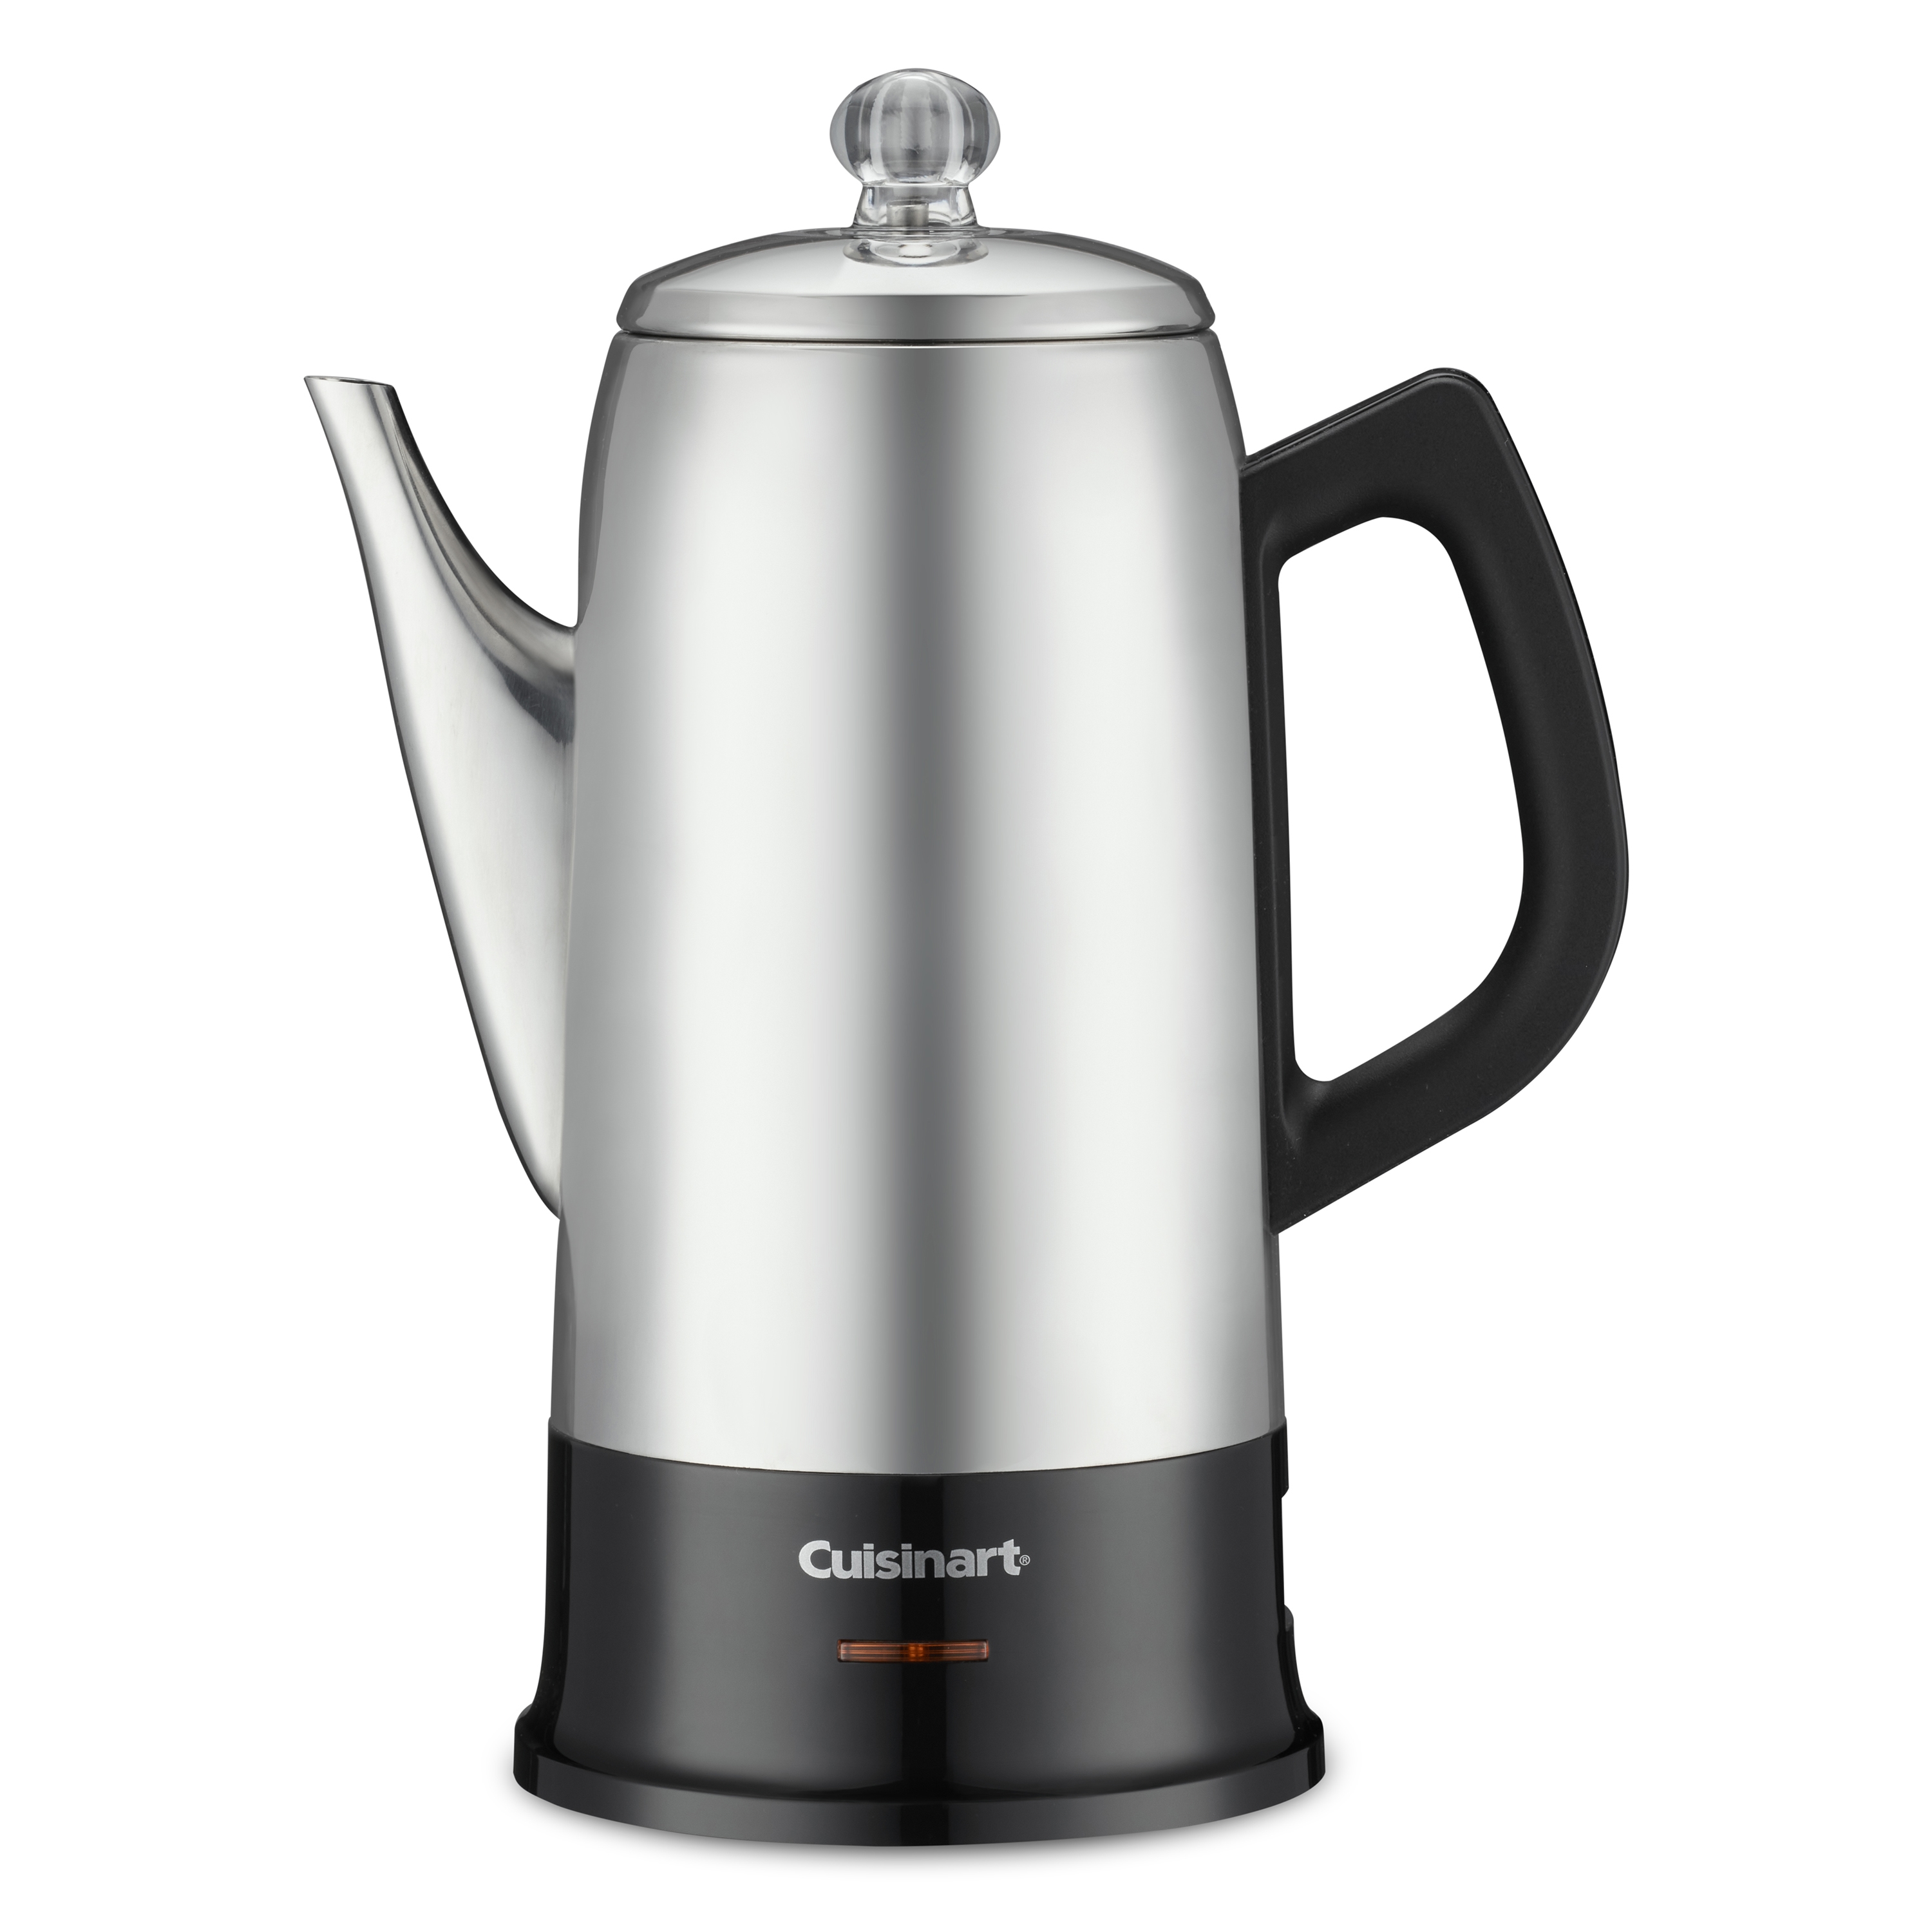 Cuisinart 12 Cup Stainless Percolator - Brewing a Pot 